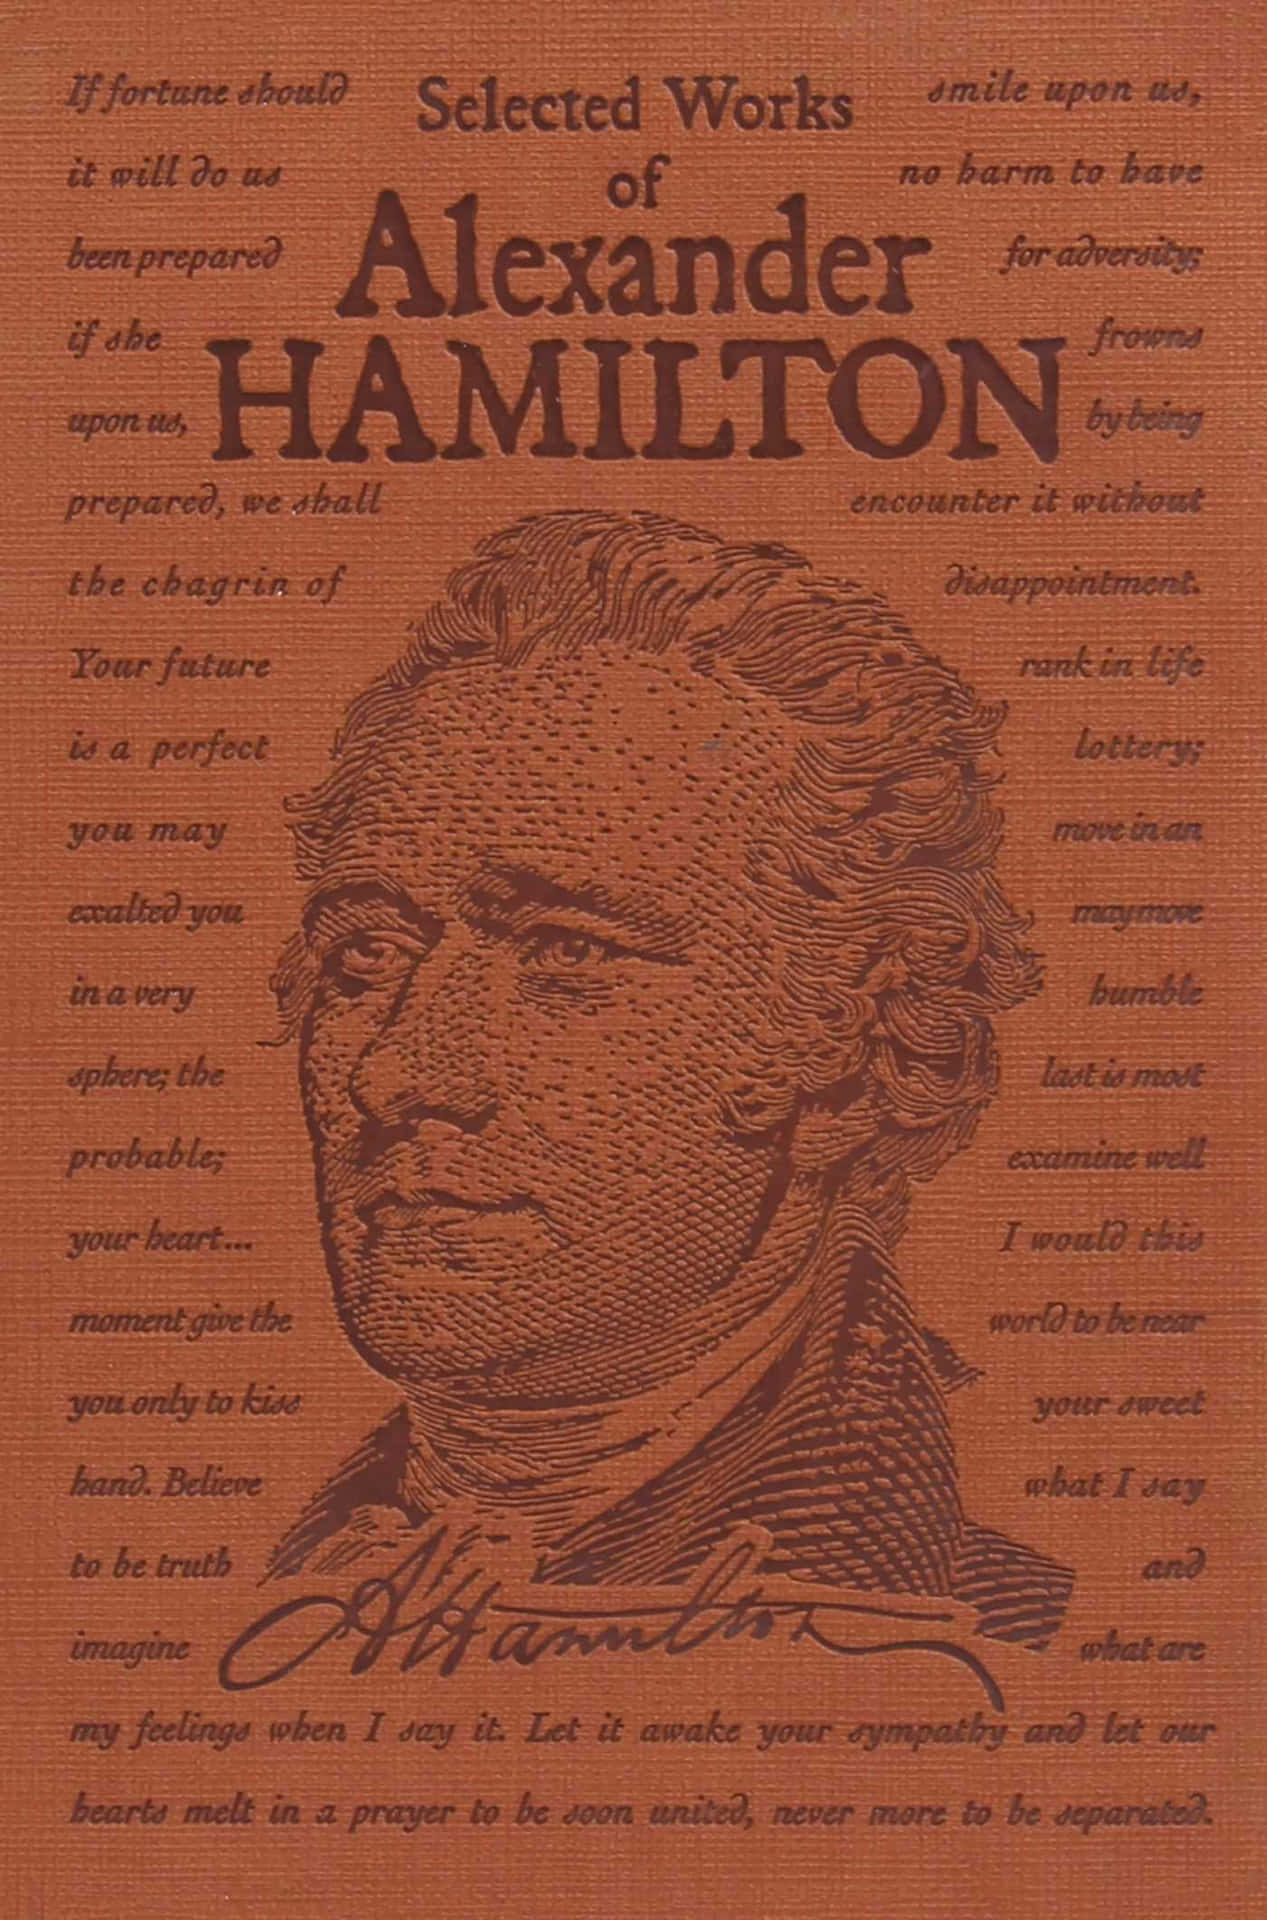 The Cover Of Alexander Hamilton's Selected Works